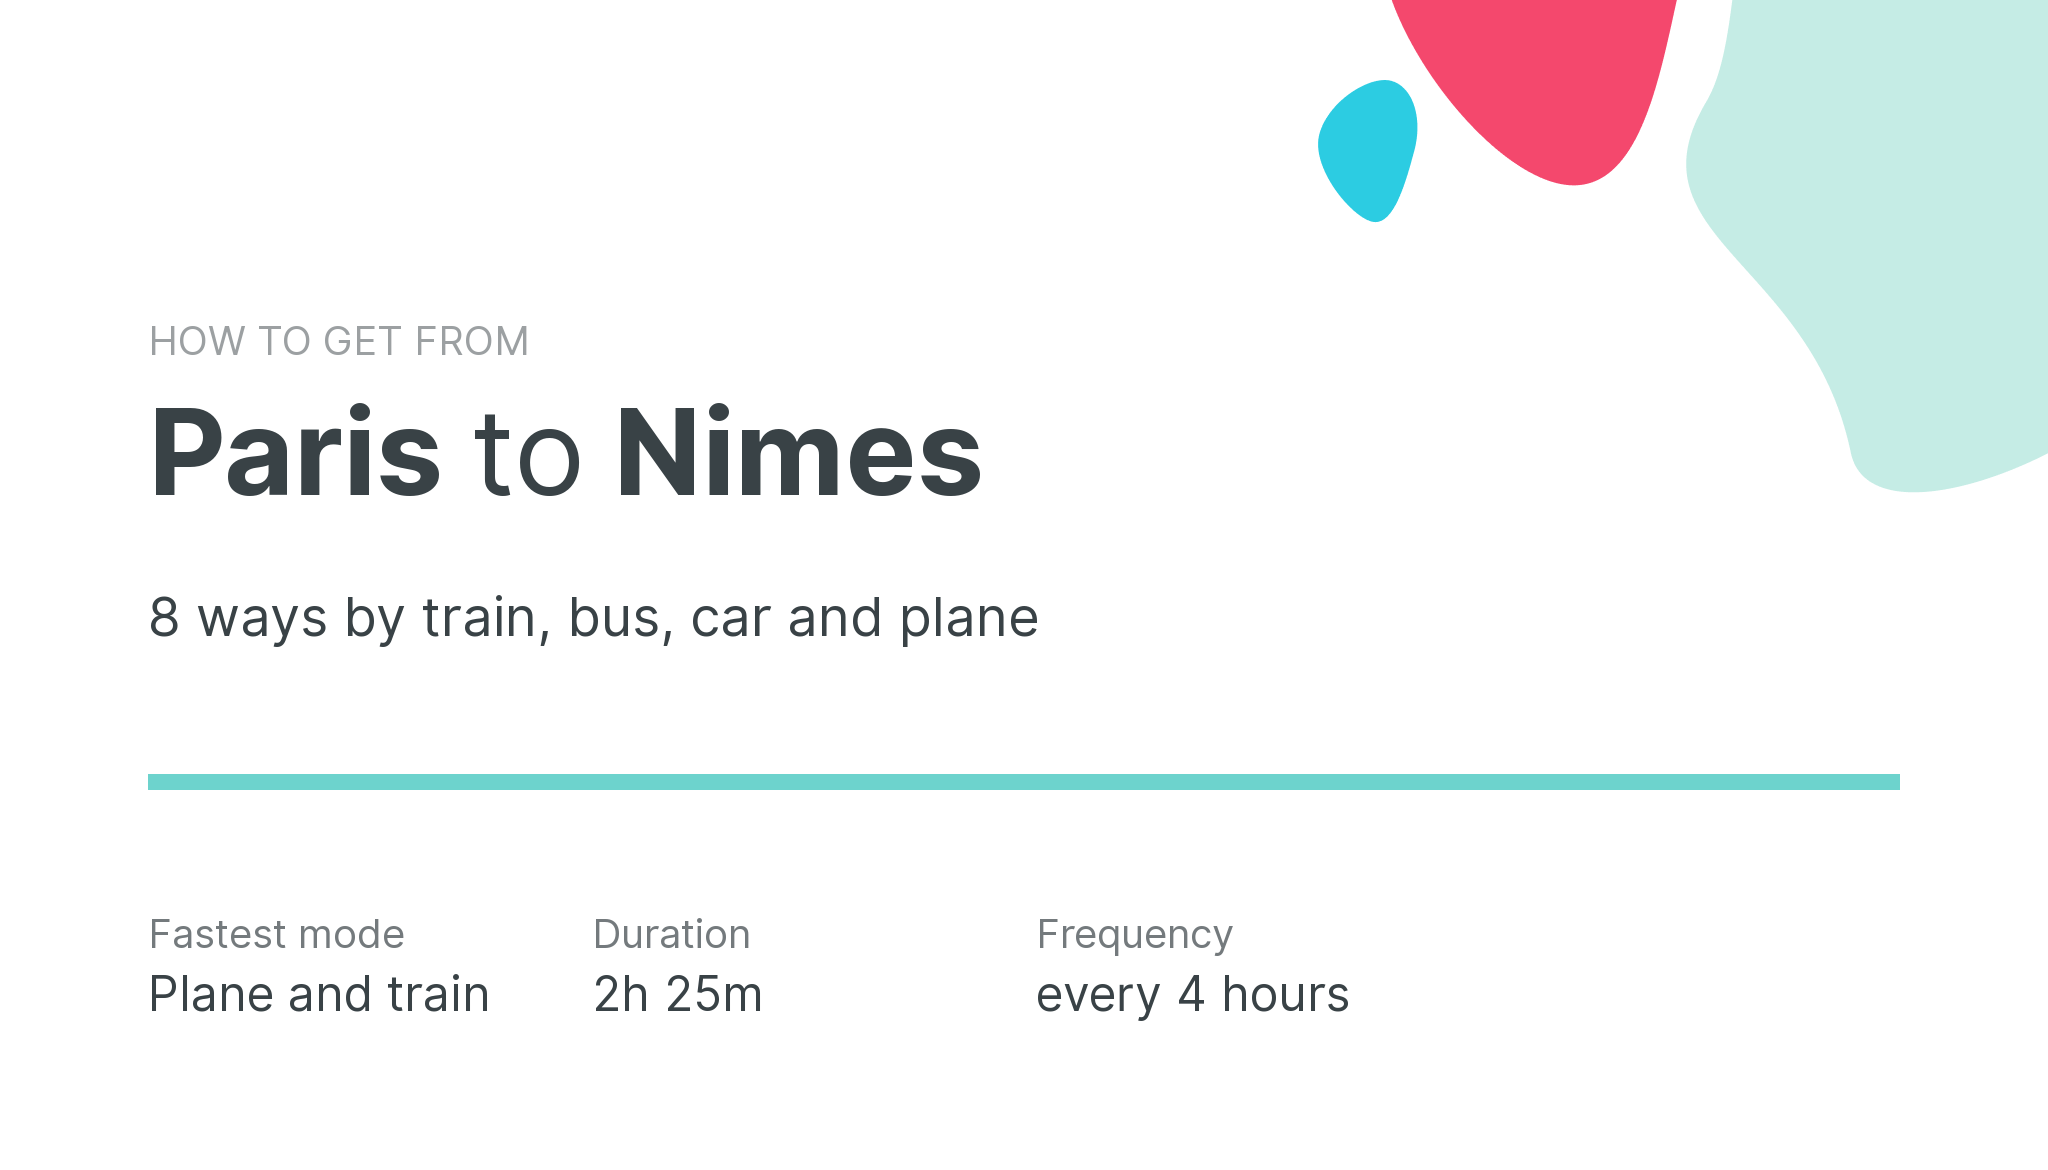 How do I get from Paris to Nimes